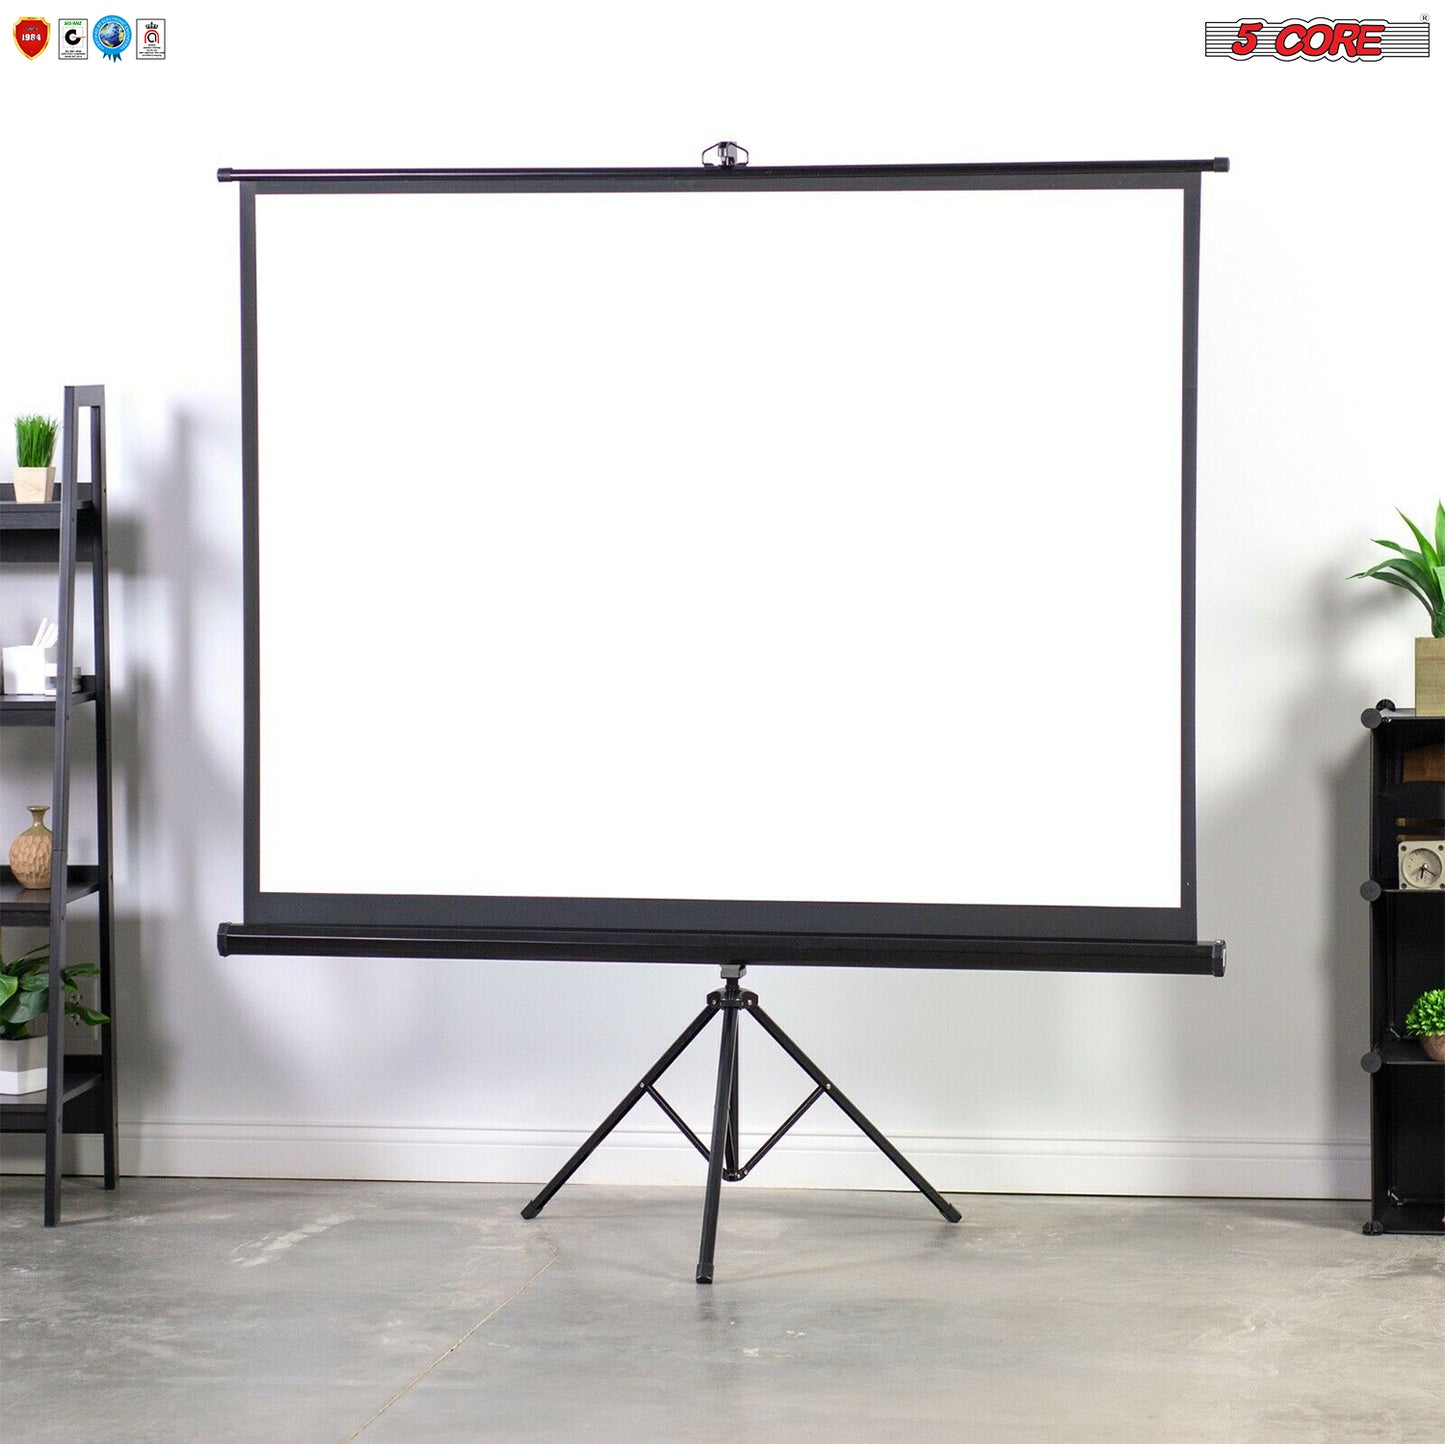 5 Core 72 inch Projection Screen 4:3 Foldable and Portable Anti-Crease Indoor Outdoor Projection Screen for Home, Party, Office, Classroom- SCREEN TR 72 (4:3)